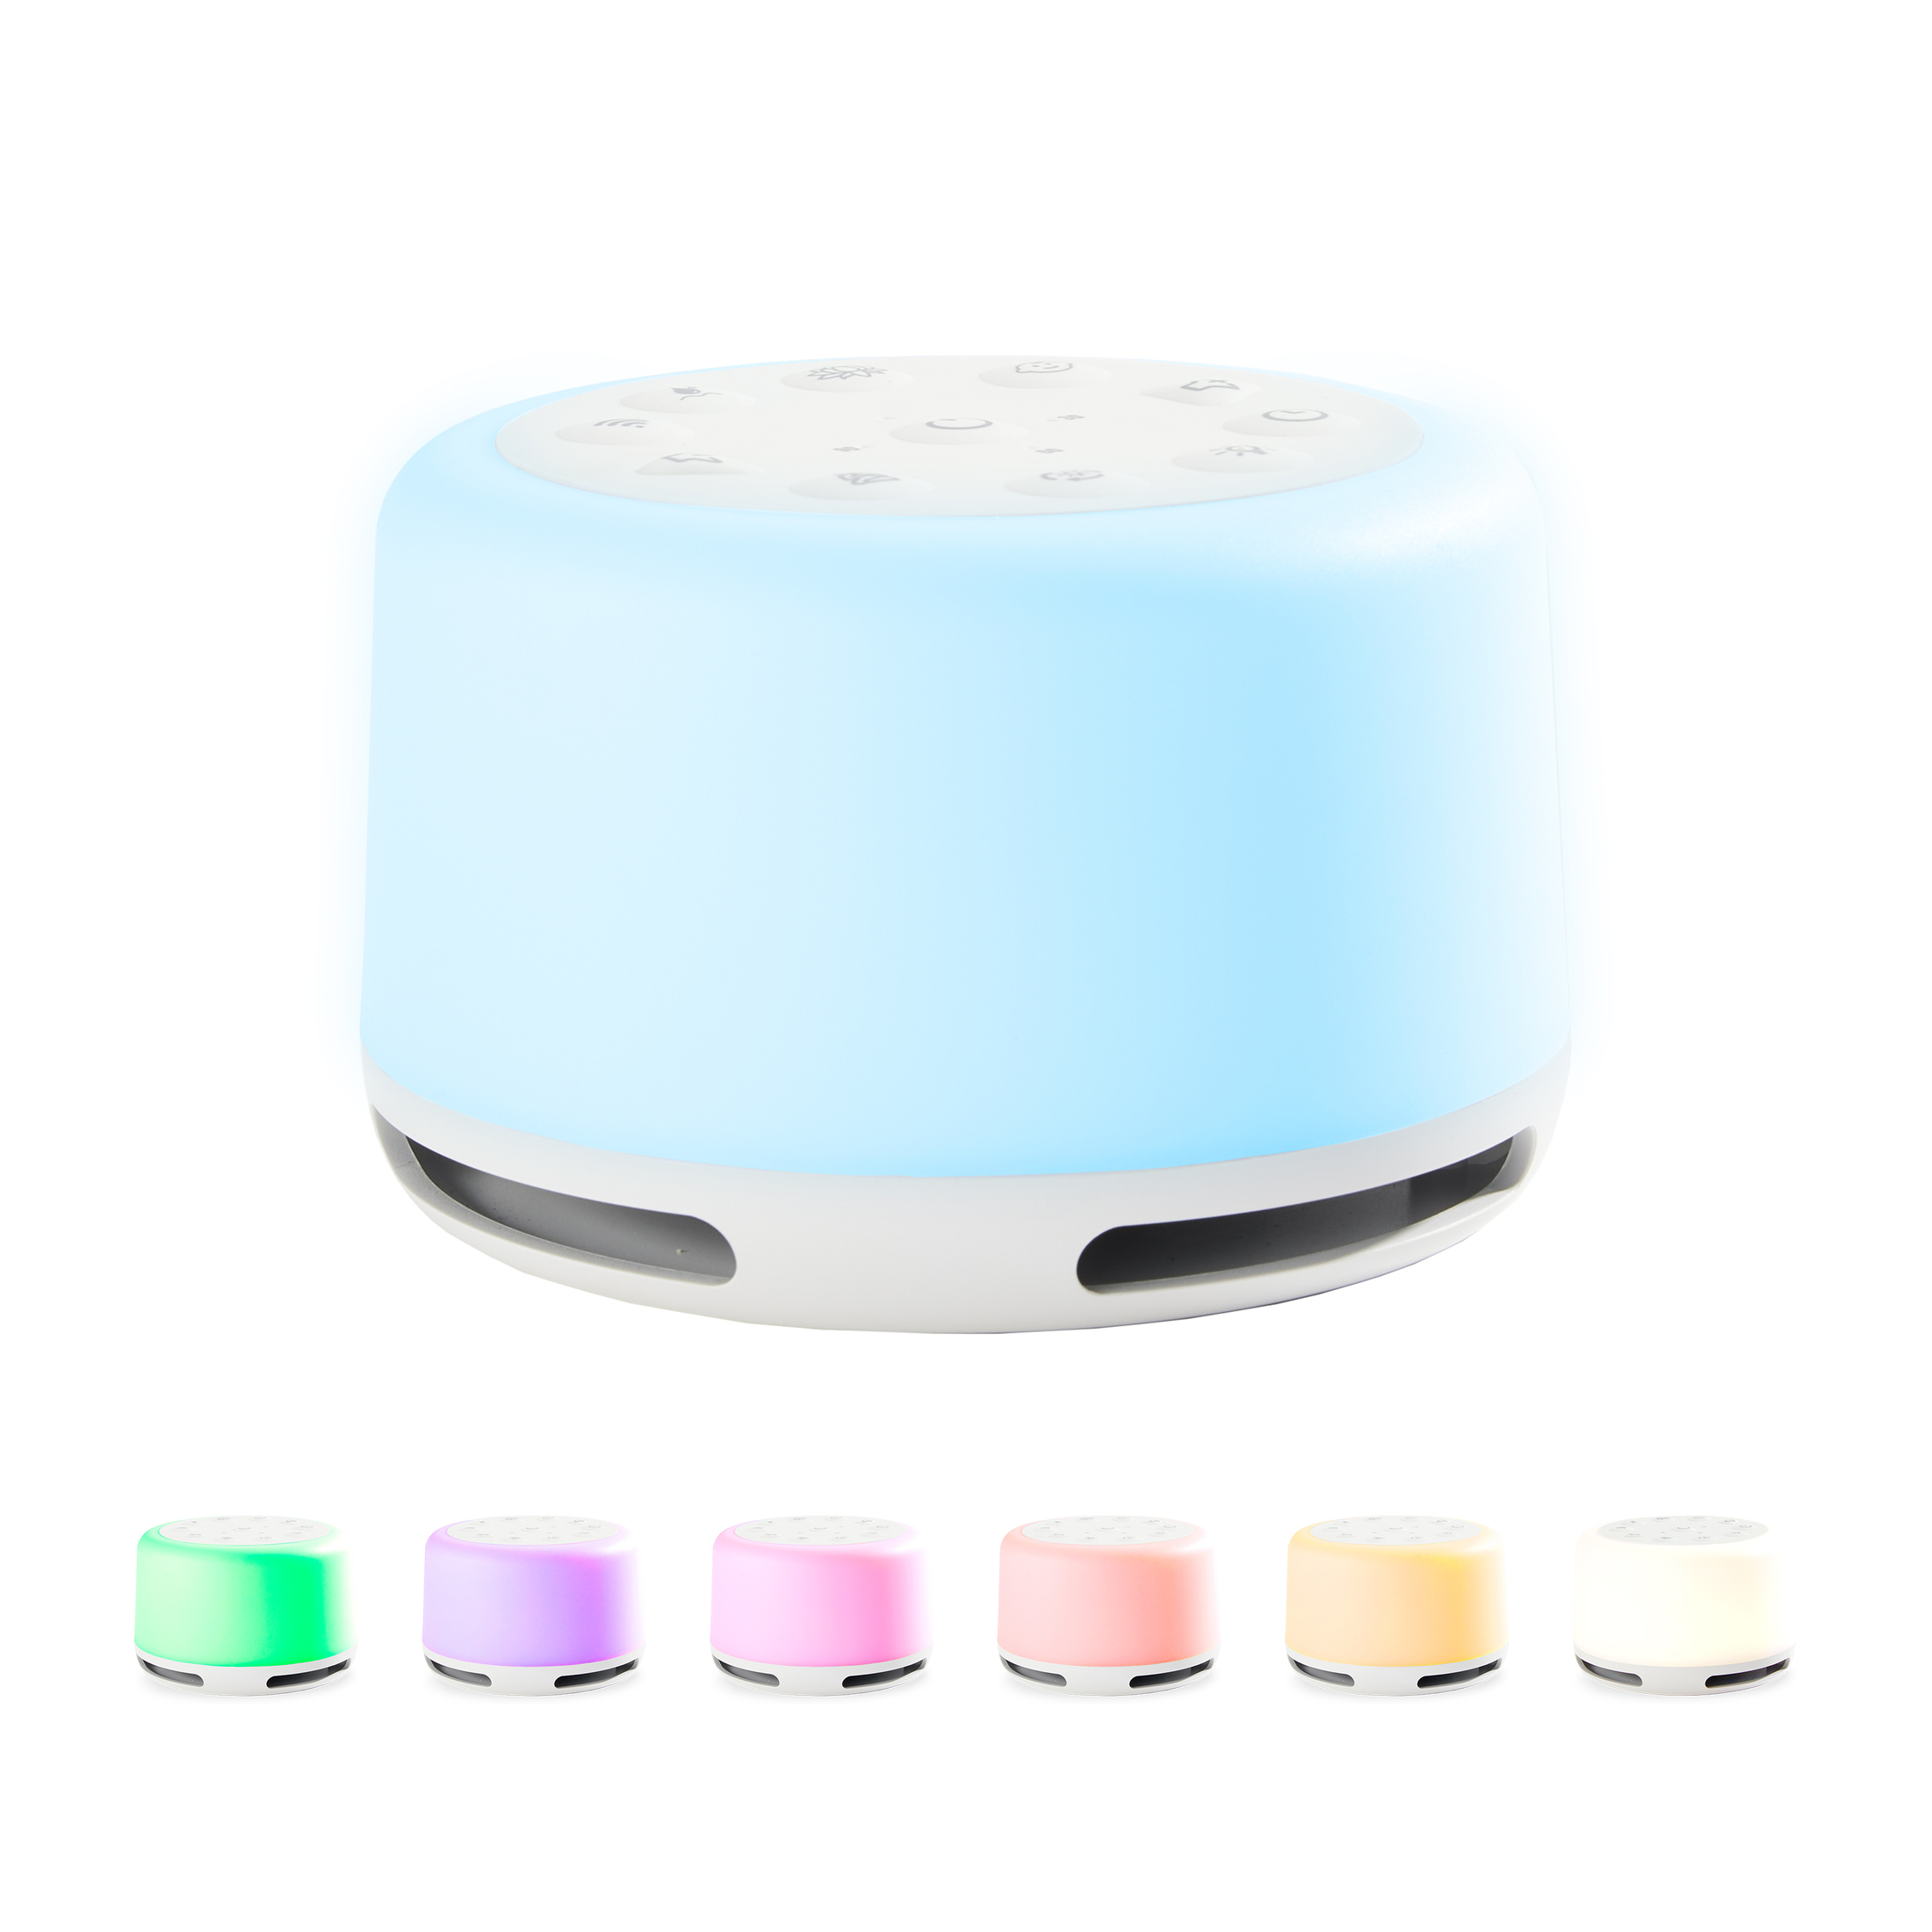 Homedics Sound-Sleep Aura - Sound machine Soothing Nature Sounds for ...